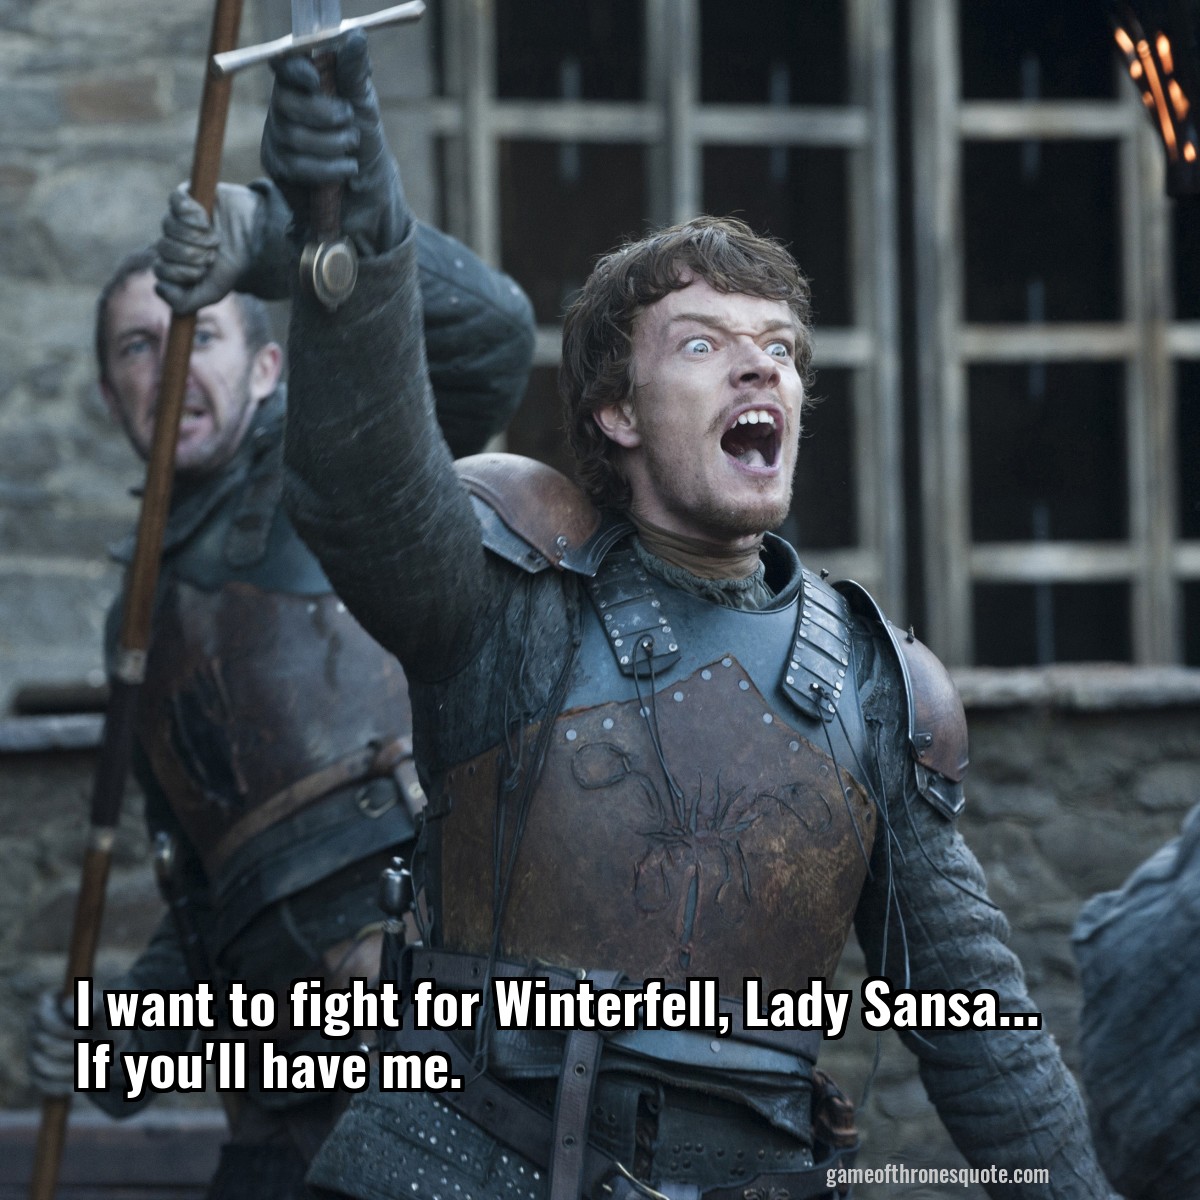 I want to fight for Winterfell, Lady Sansa... If you'll have me.